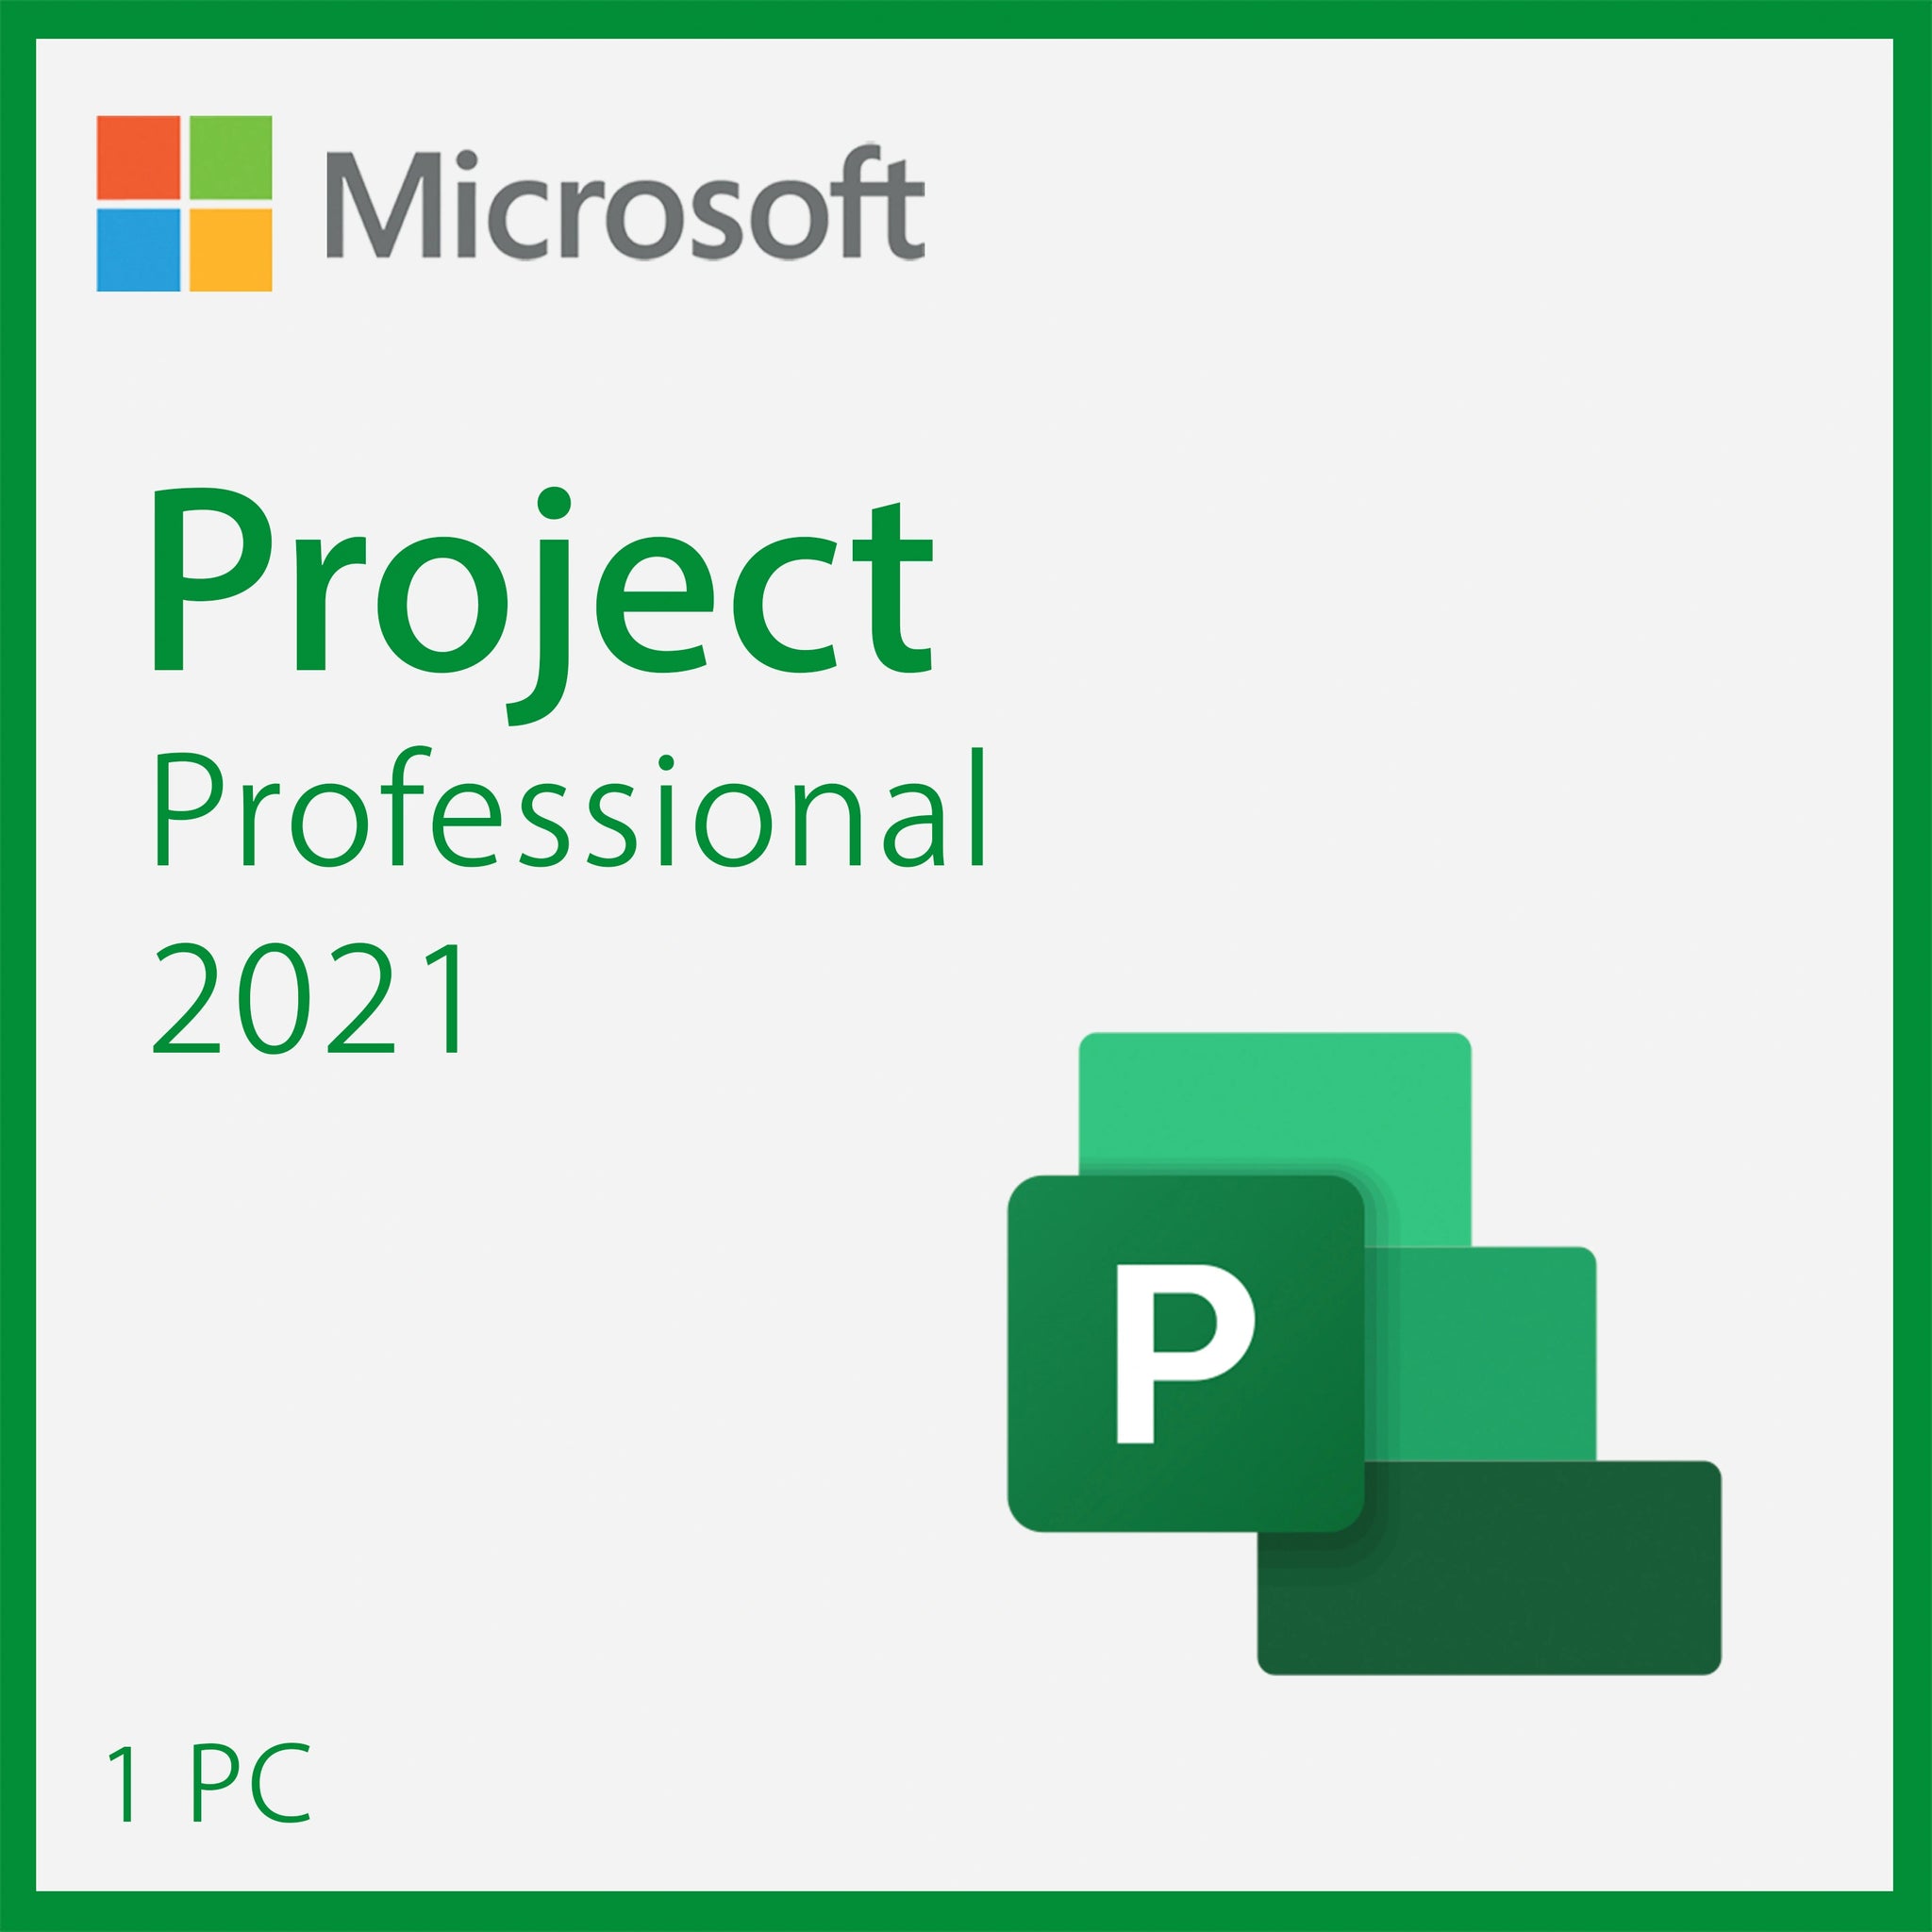 Microsoft Project 2021 Professional - Lifetime License Key for 1 PC